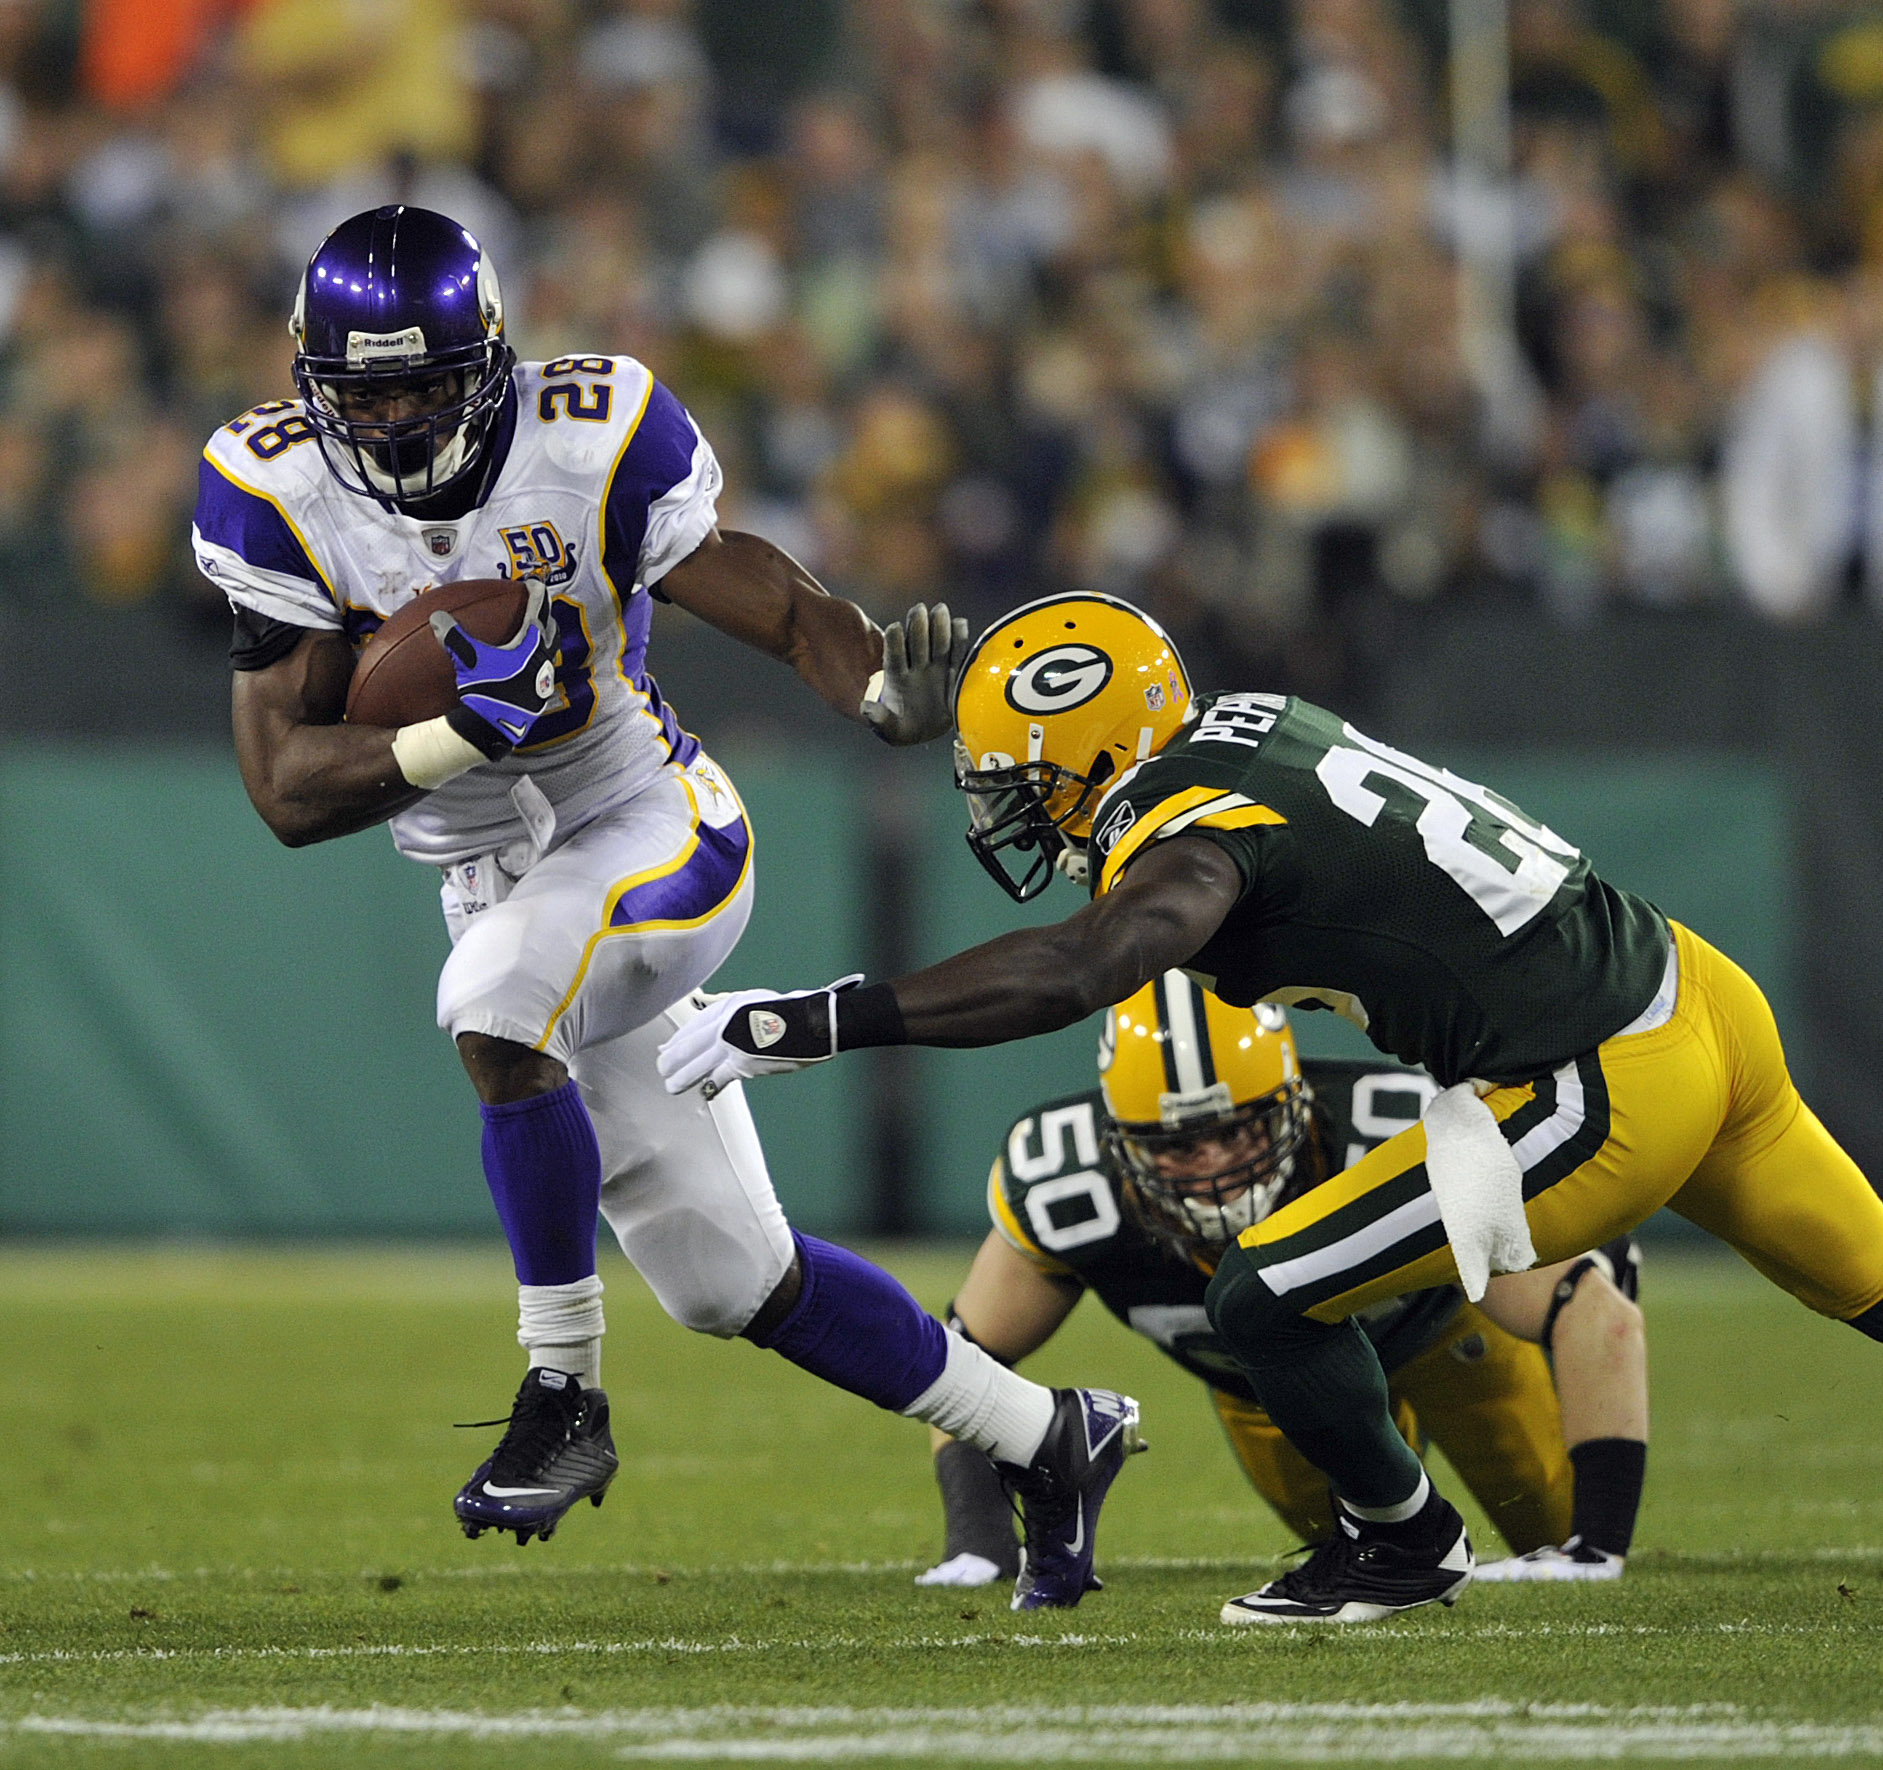 GREEN BAY, WI - OCTOBER 24:  Adrian Peterson #28 of the Minnesota Vikings runs upfield as Charlie Peprah #26 of the Green Bay Packers misses the tackle at Lambeau Field on October 24, 2010 in Green Bay, Wisconsin. (Photo by Jim Prisching/Getty Images)